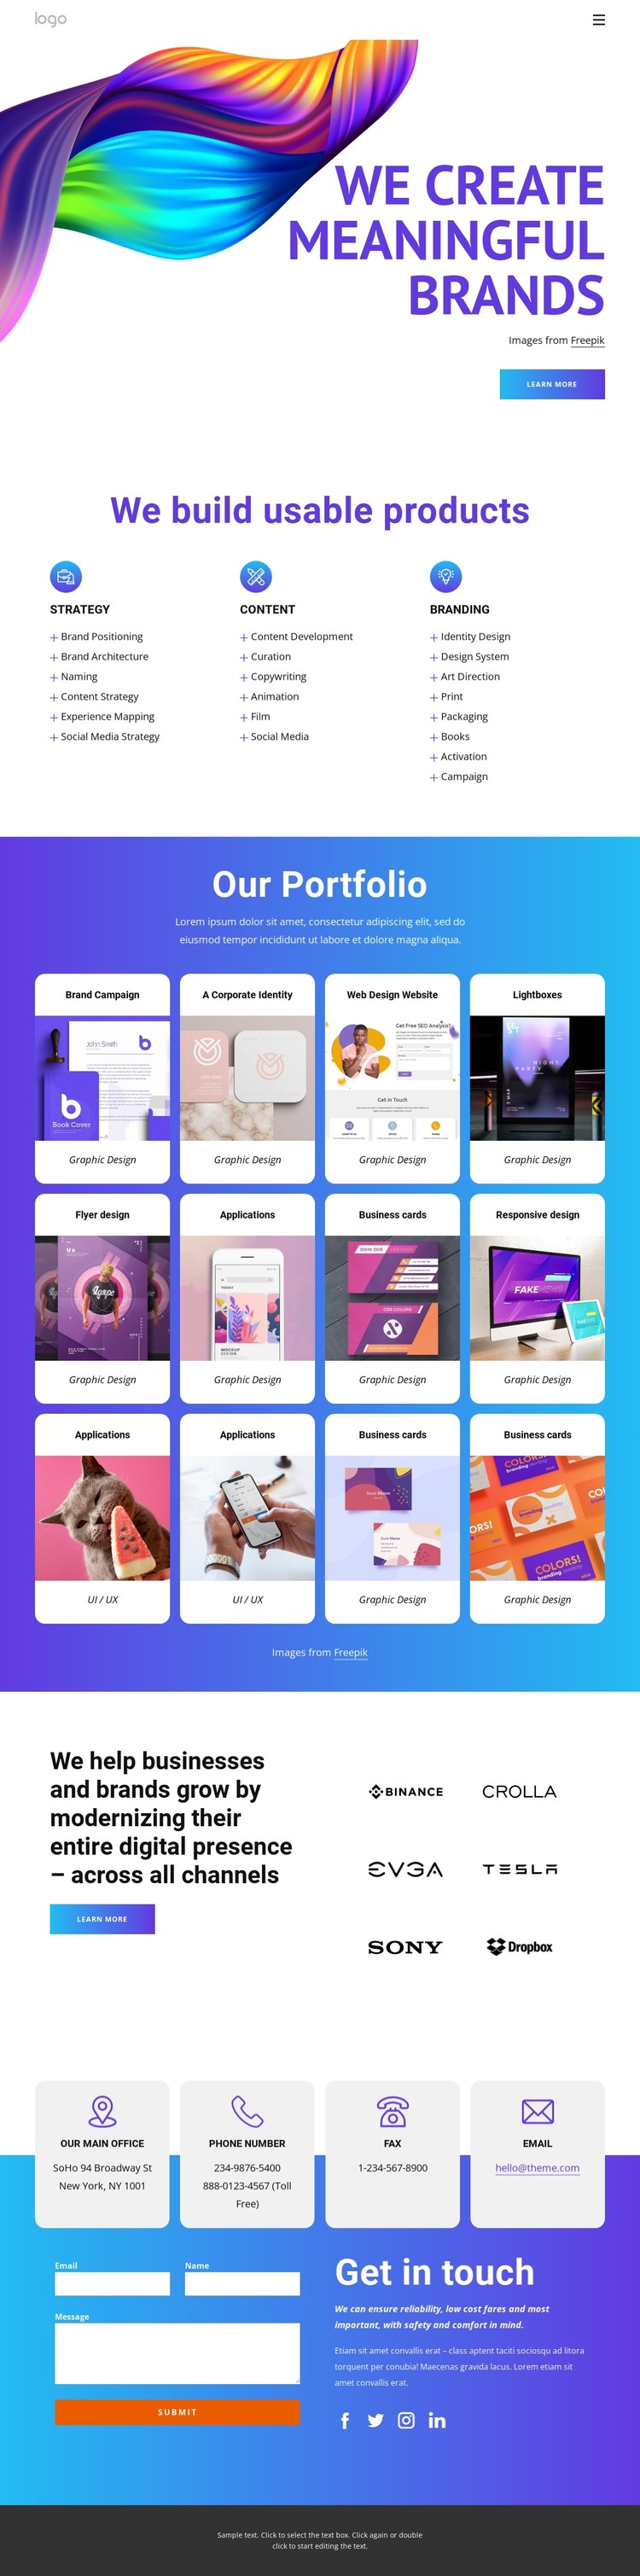 We create meaningful brands HTML Template